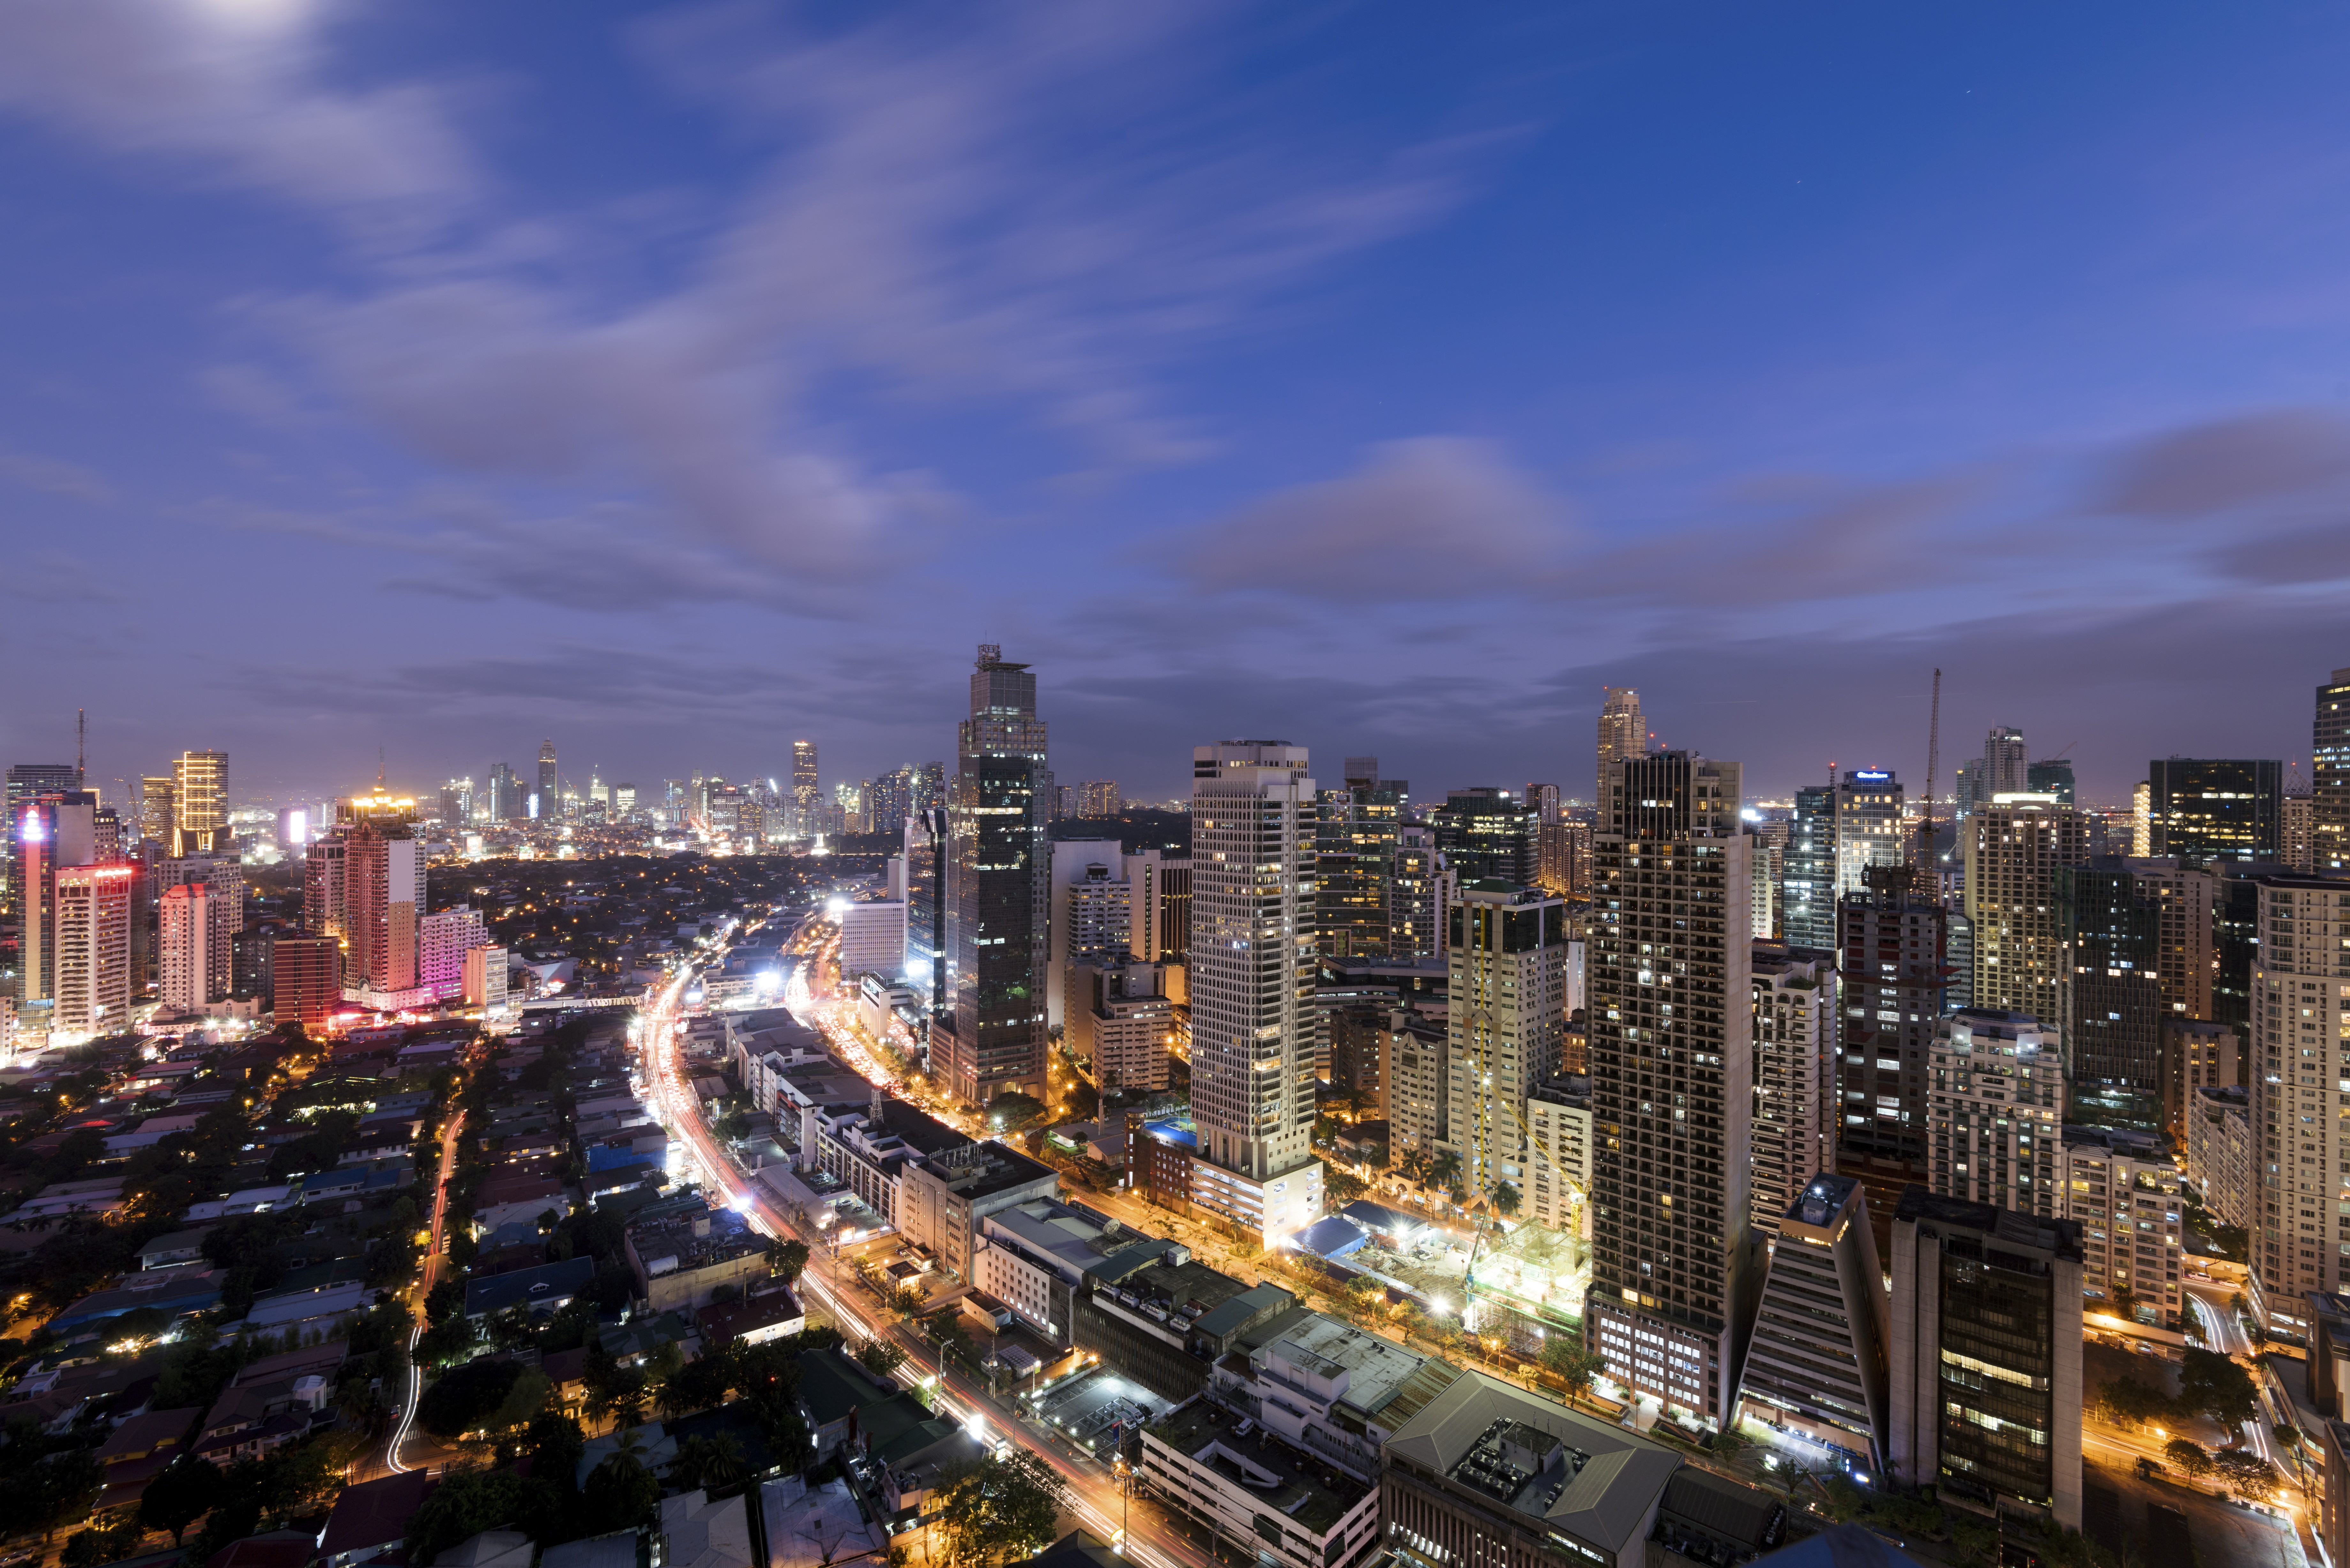 With below five per cent vacancy rate, analysts are upbeat about the Manila office market. Photo: Shutterstock